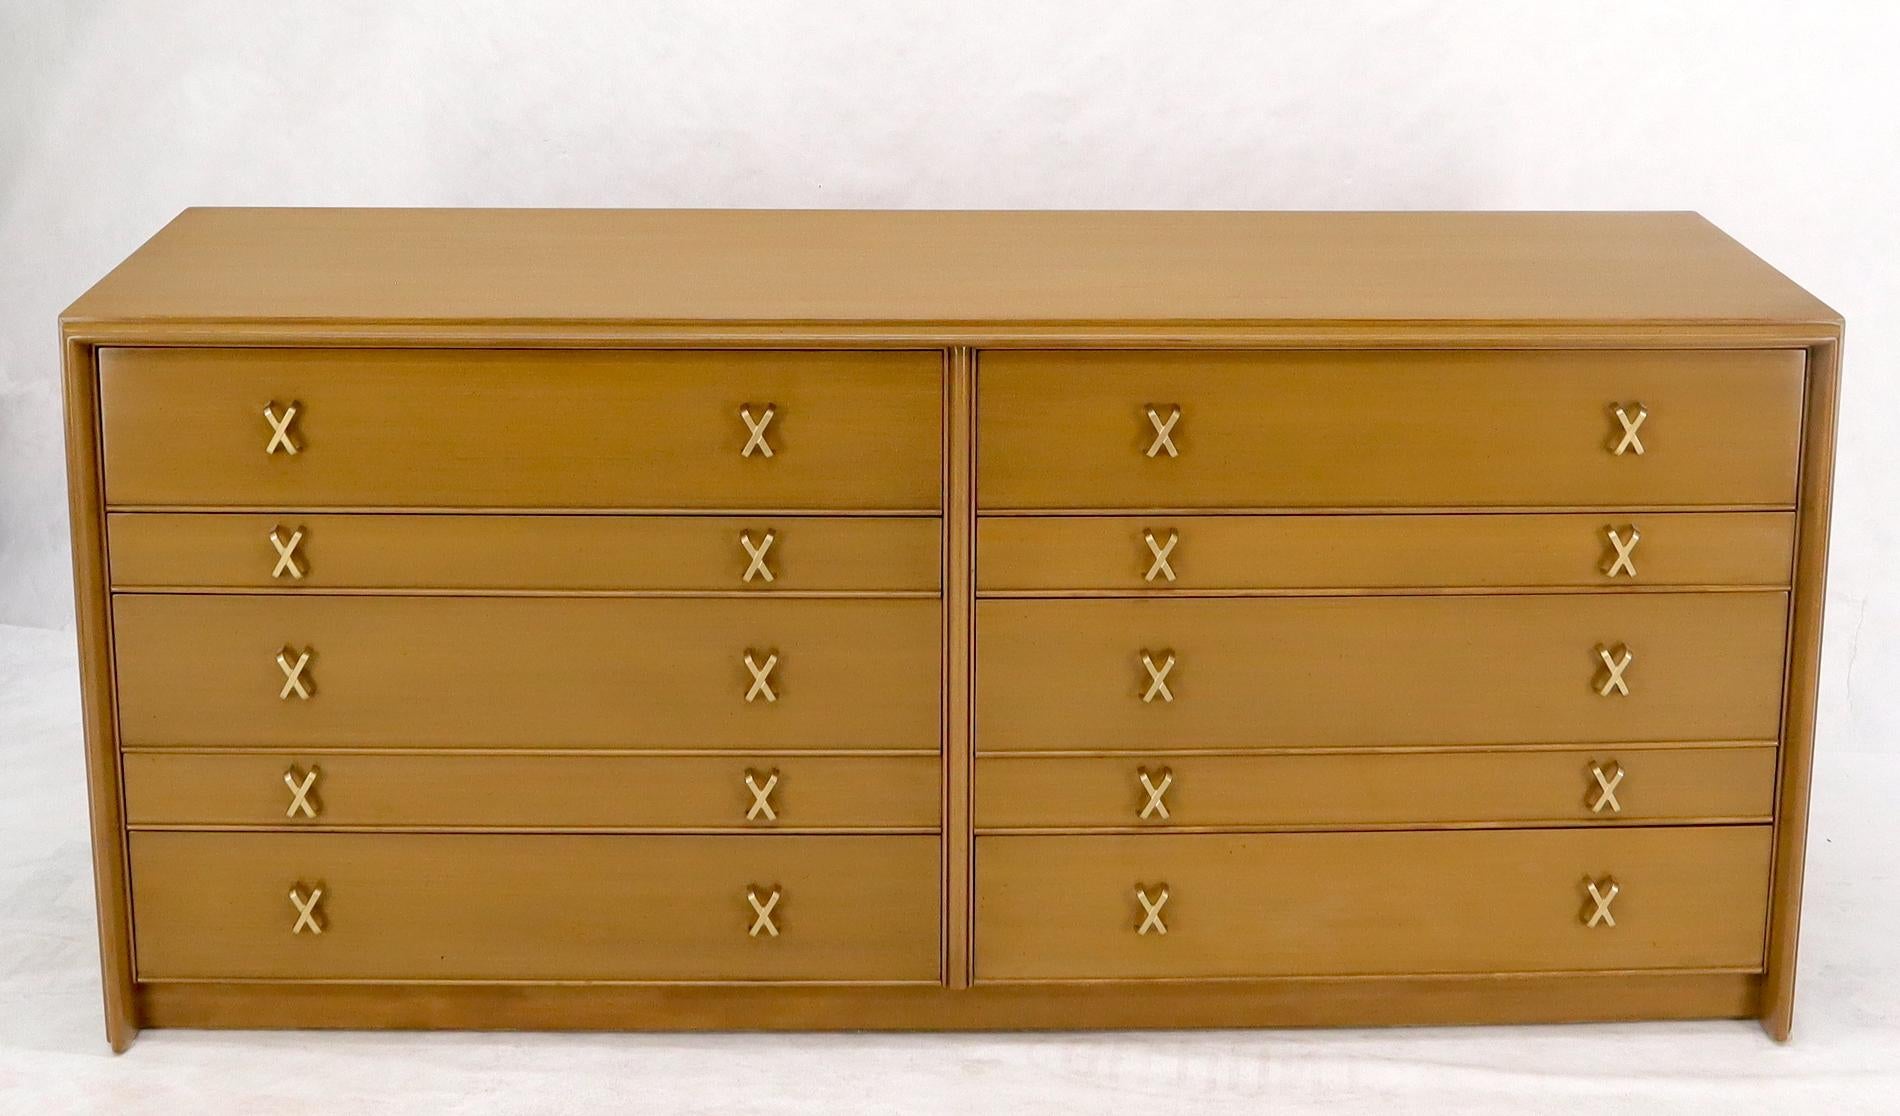 Mid-Century Modern tan walnut finish double dresser credenza by Paul Frankl for Johnson Furniture.